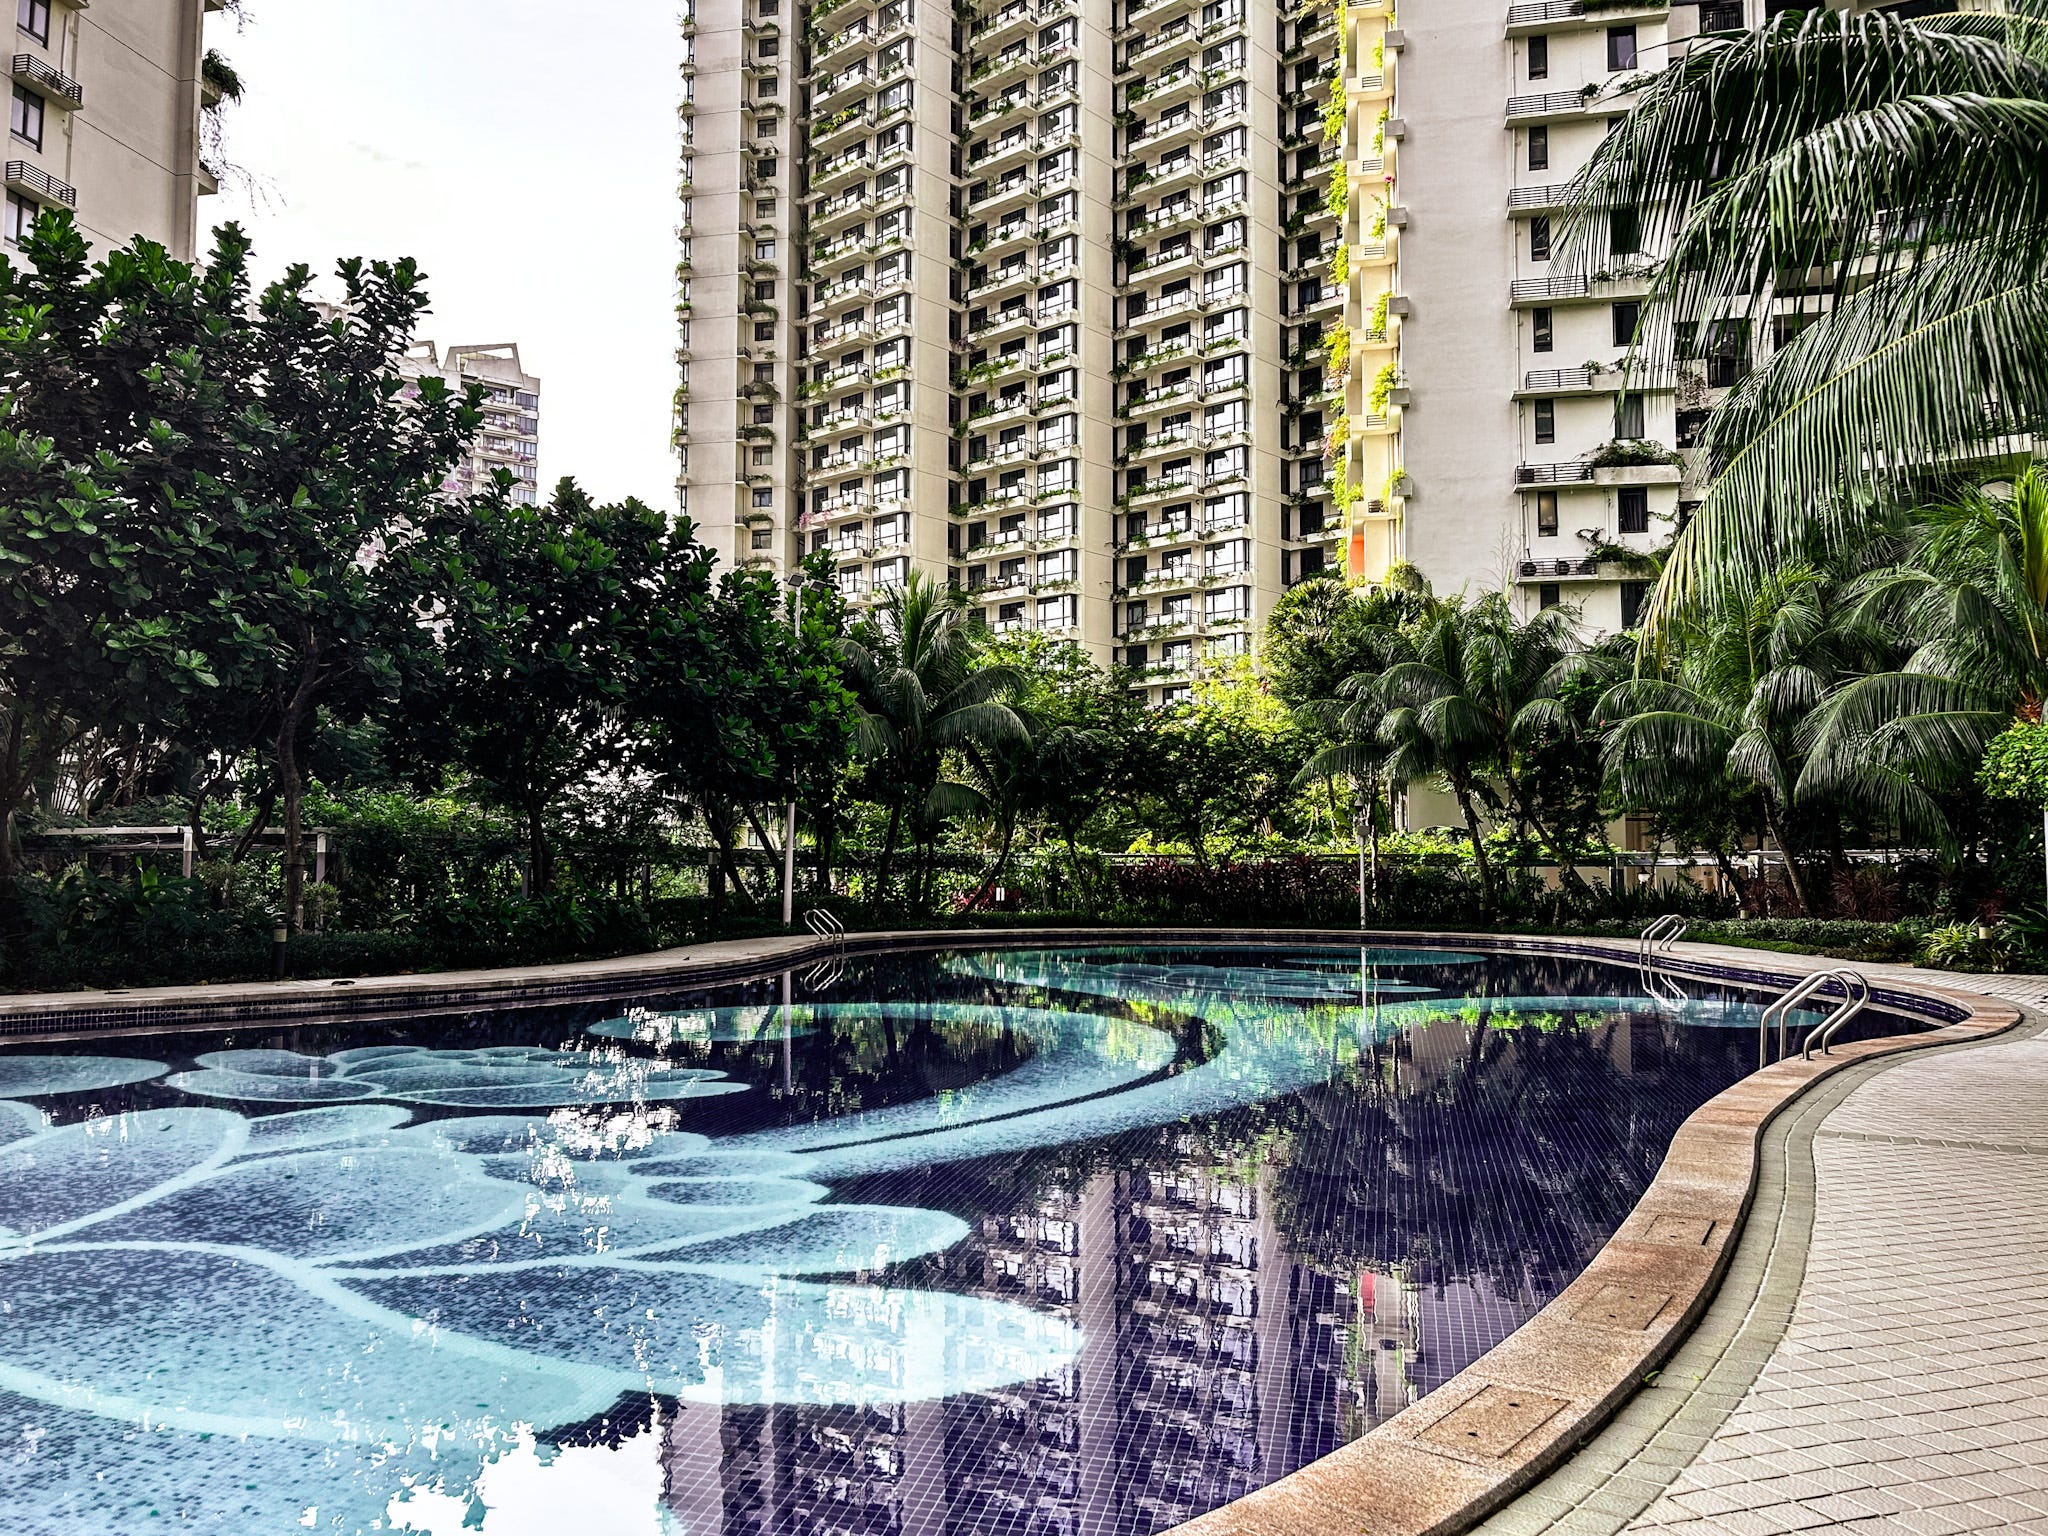 <p>Outside, there was a swimming pool, several outdoor gyms, and a playground.</p><p>There was no one at the pool in the morning. The Jacuzzi was full of cloudy-looking water.</p><p>I spotted a total of three residents, one of whom was blasting a song in Chinese from her phone and exercising on one of the tai chi spinners at the outdoor gym.</p><p>It looked like an average residential neighborhood in Singapore — with its endless<a href="https://www.businessinsider.com/see-inside-public-housing-singapore-hdb-million-dollars-blue-zone-2023-11"> blocks of public housing</a> and the ubiquitous sight of plants and trees — but without the people.</p>